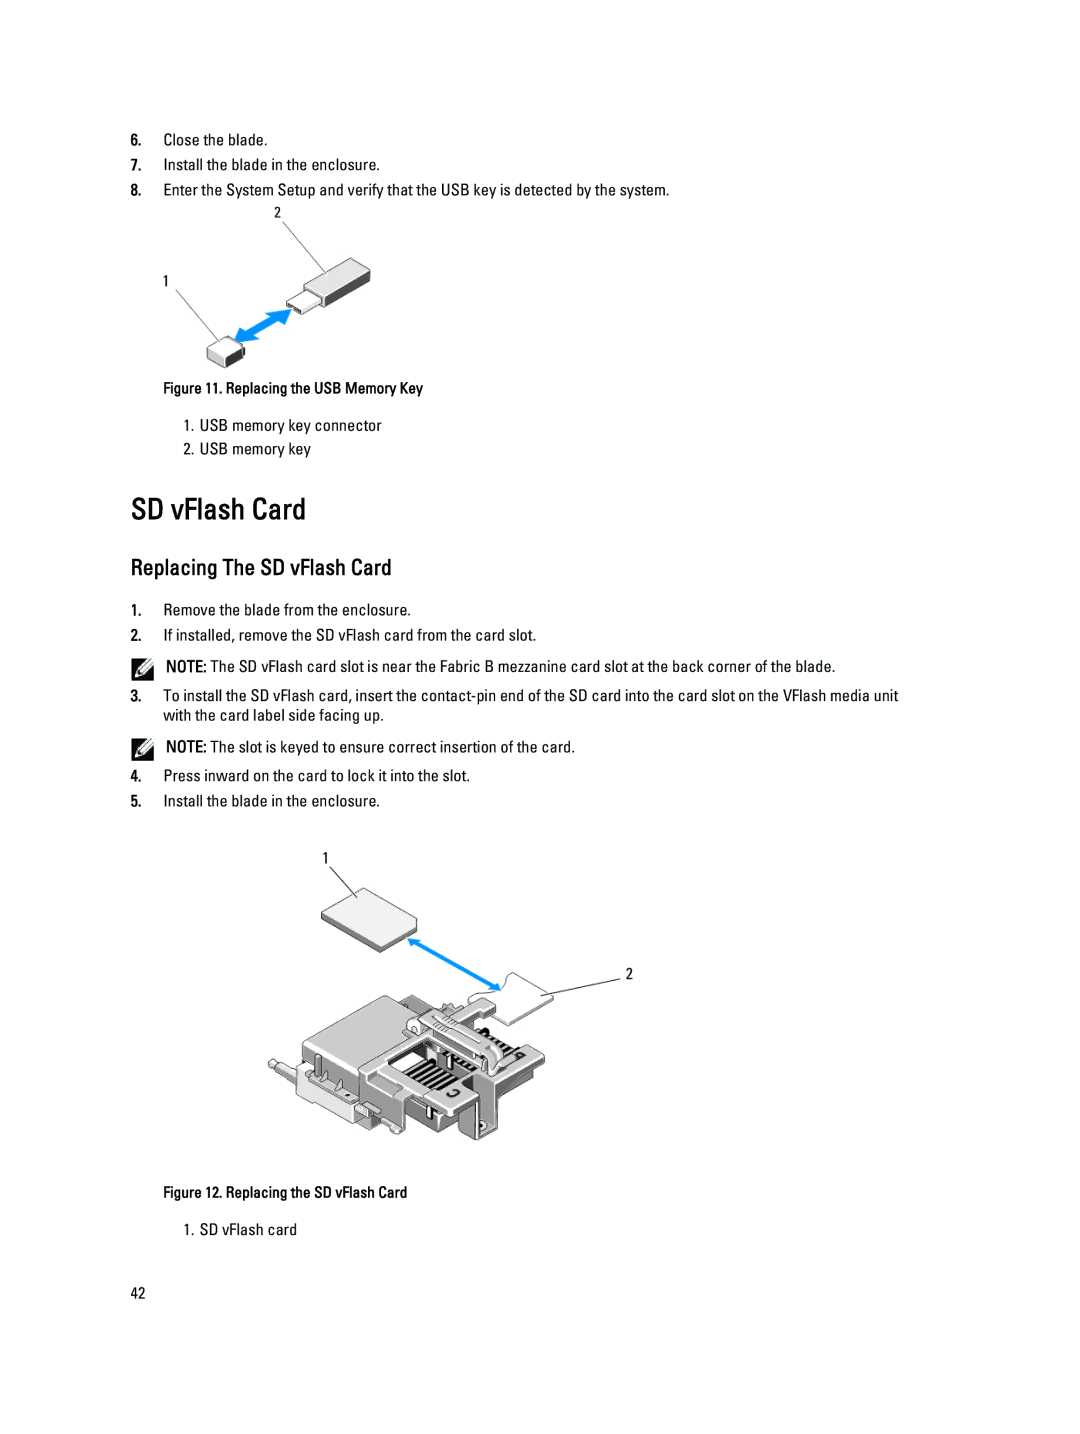 Dell M620 owner manual Replacing The SD vFlash Card 